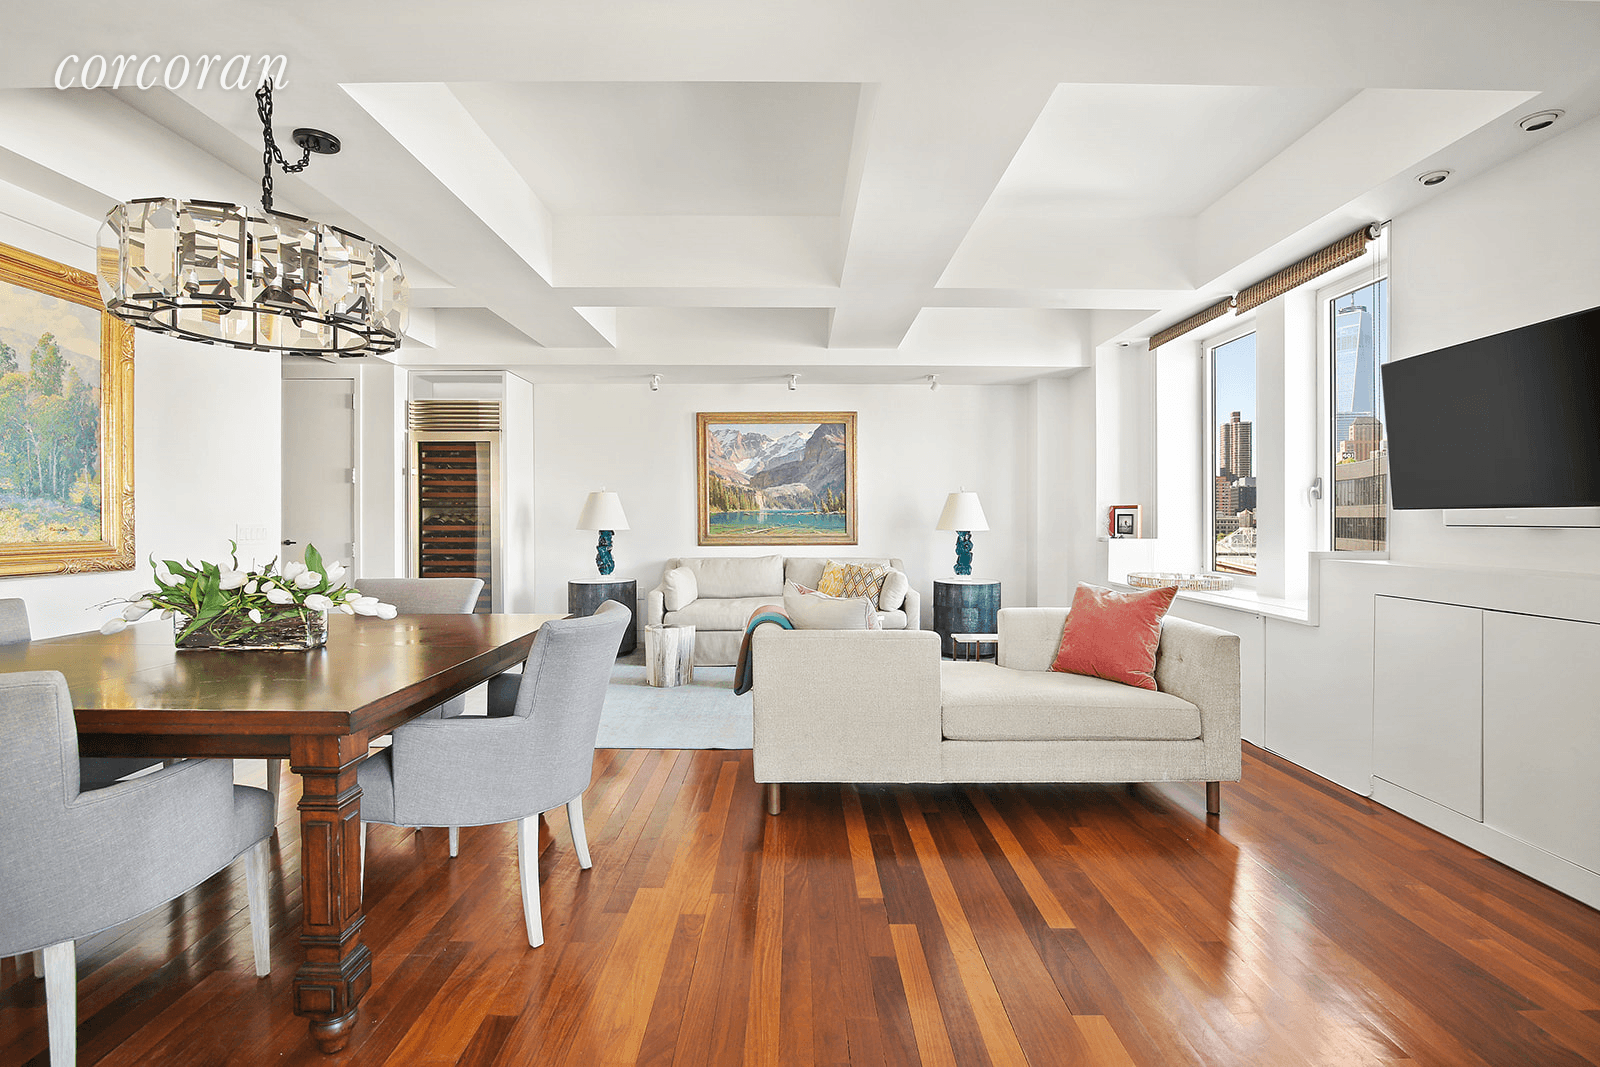 Situated in Cass Gilberts Beaux Arts SPRING building, this sun splashed split three bedroom apartment is moments from the best shopping and dining New York has to offer.